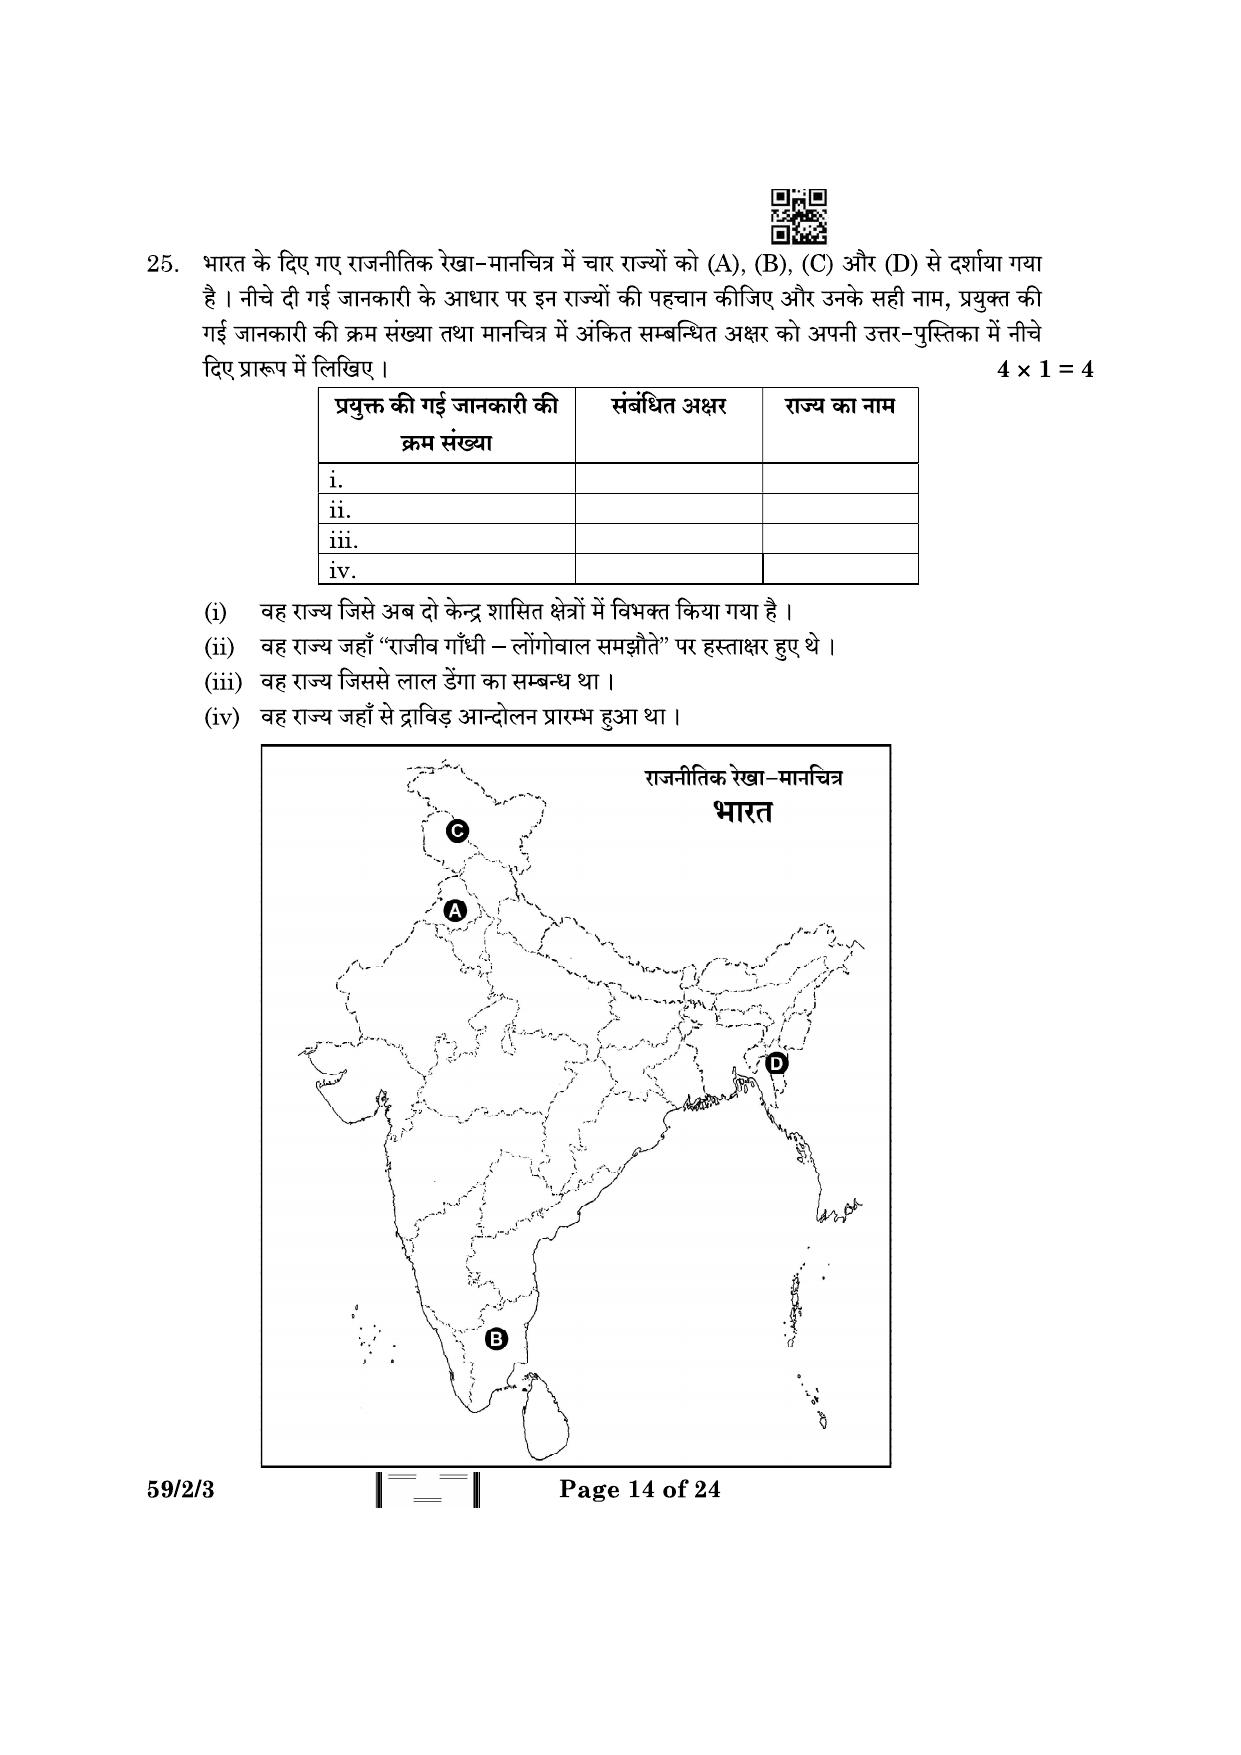 CBSE Class 12 59-2-3 Political Science 2023 Question Paper - Page 14